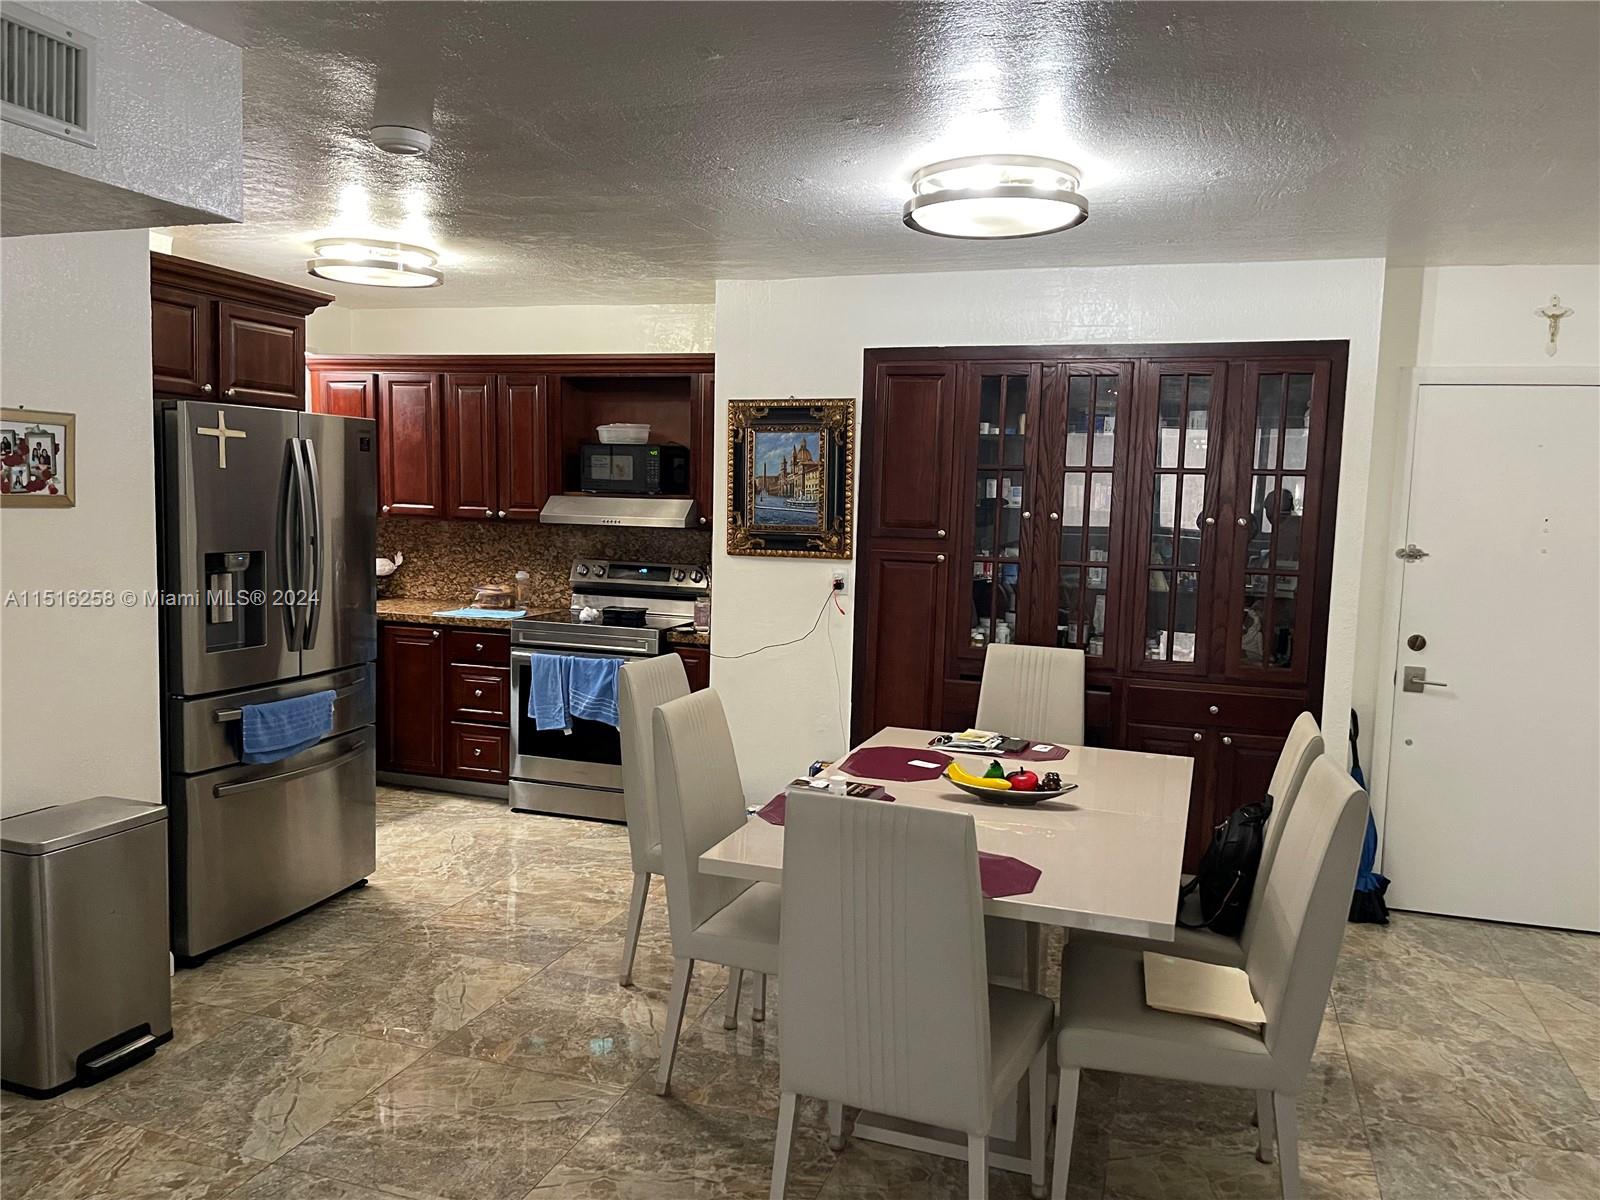 a kitchen with stainless steel appliances kitchen island granite countertop a refrigerator a stove a microwave oven a dining table and chairs with wooden floor